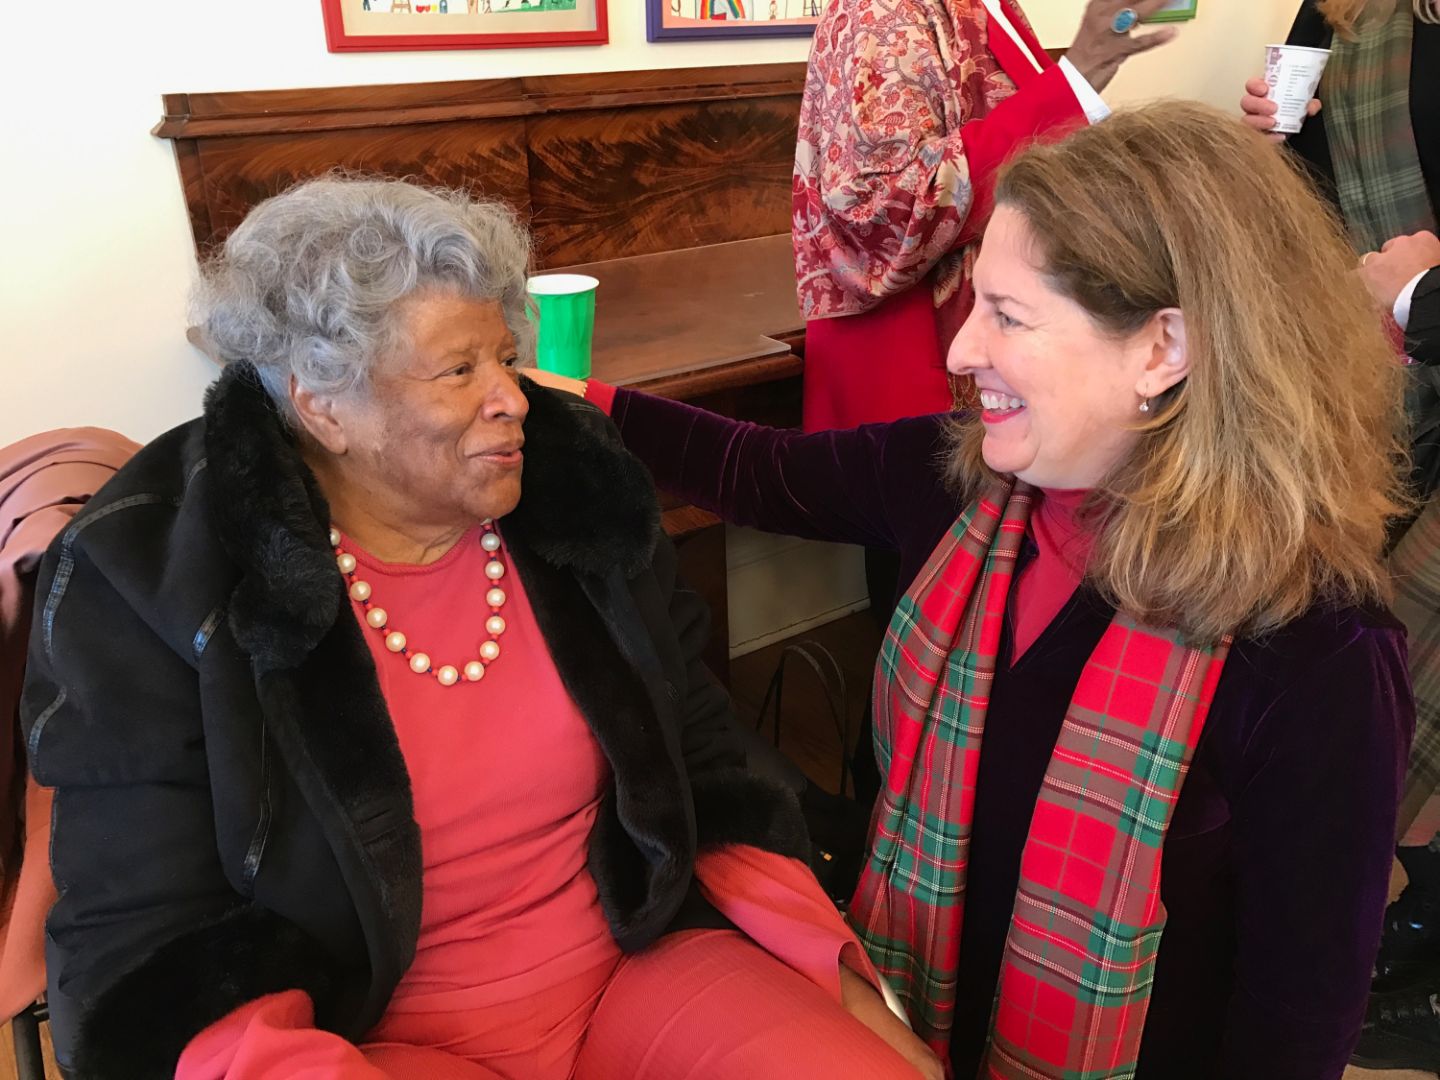 Mrs. Nellie Brooks Quander, the Grand Marshal of The Campagna Center's Scottish Christmas Walk Parade in December 2016, chatted with Mayor Silberberg right before start of the parade.